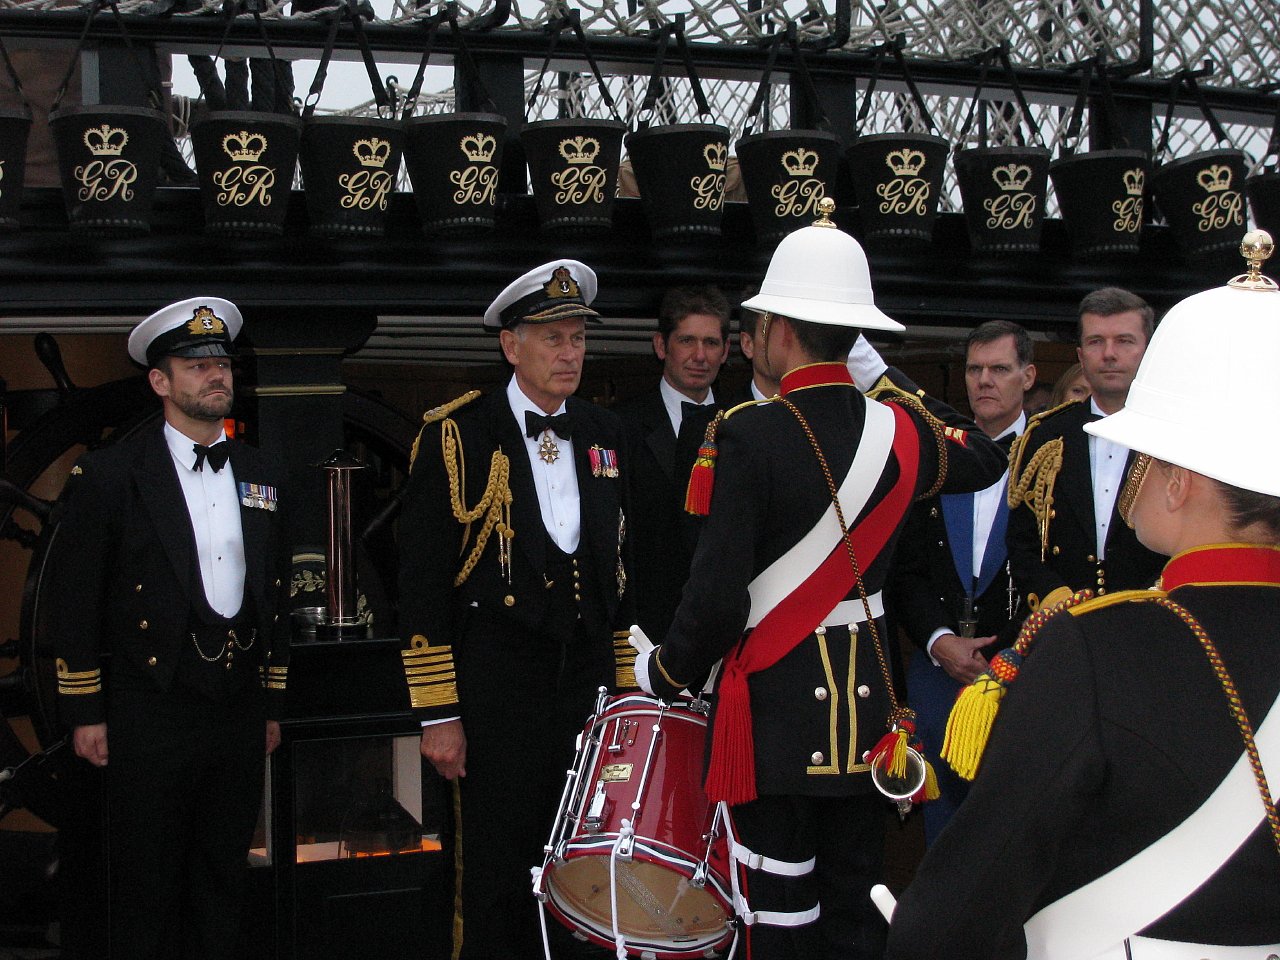 Project+Vernon+charity+dinner+on+board+HMS+Victory+11+Sep+2014+(39).jpg